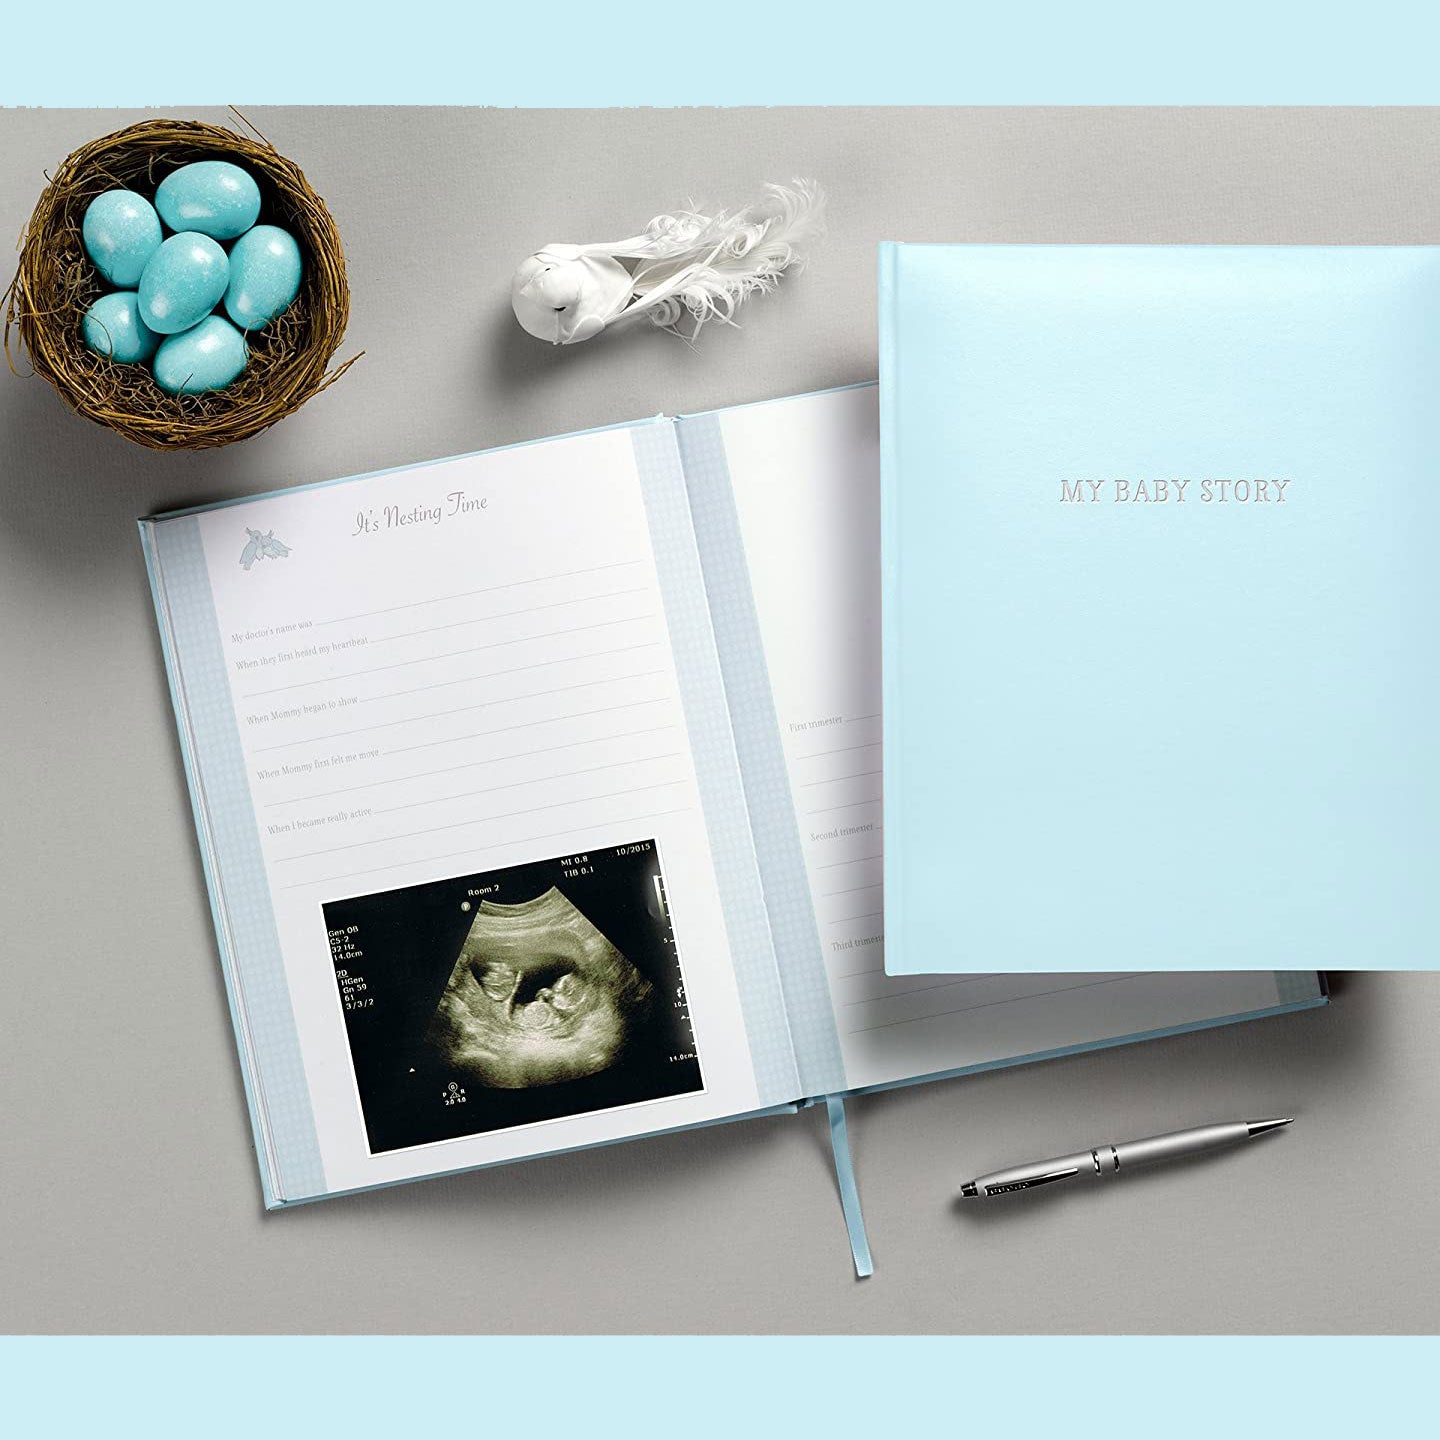 My Baby Story Bound Blue Leather Memory Book